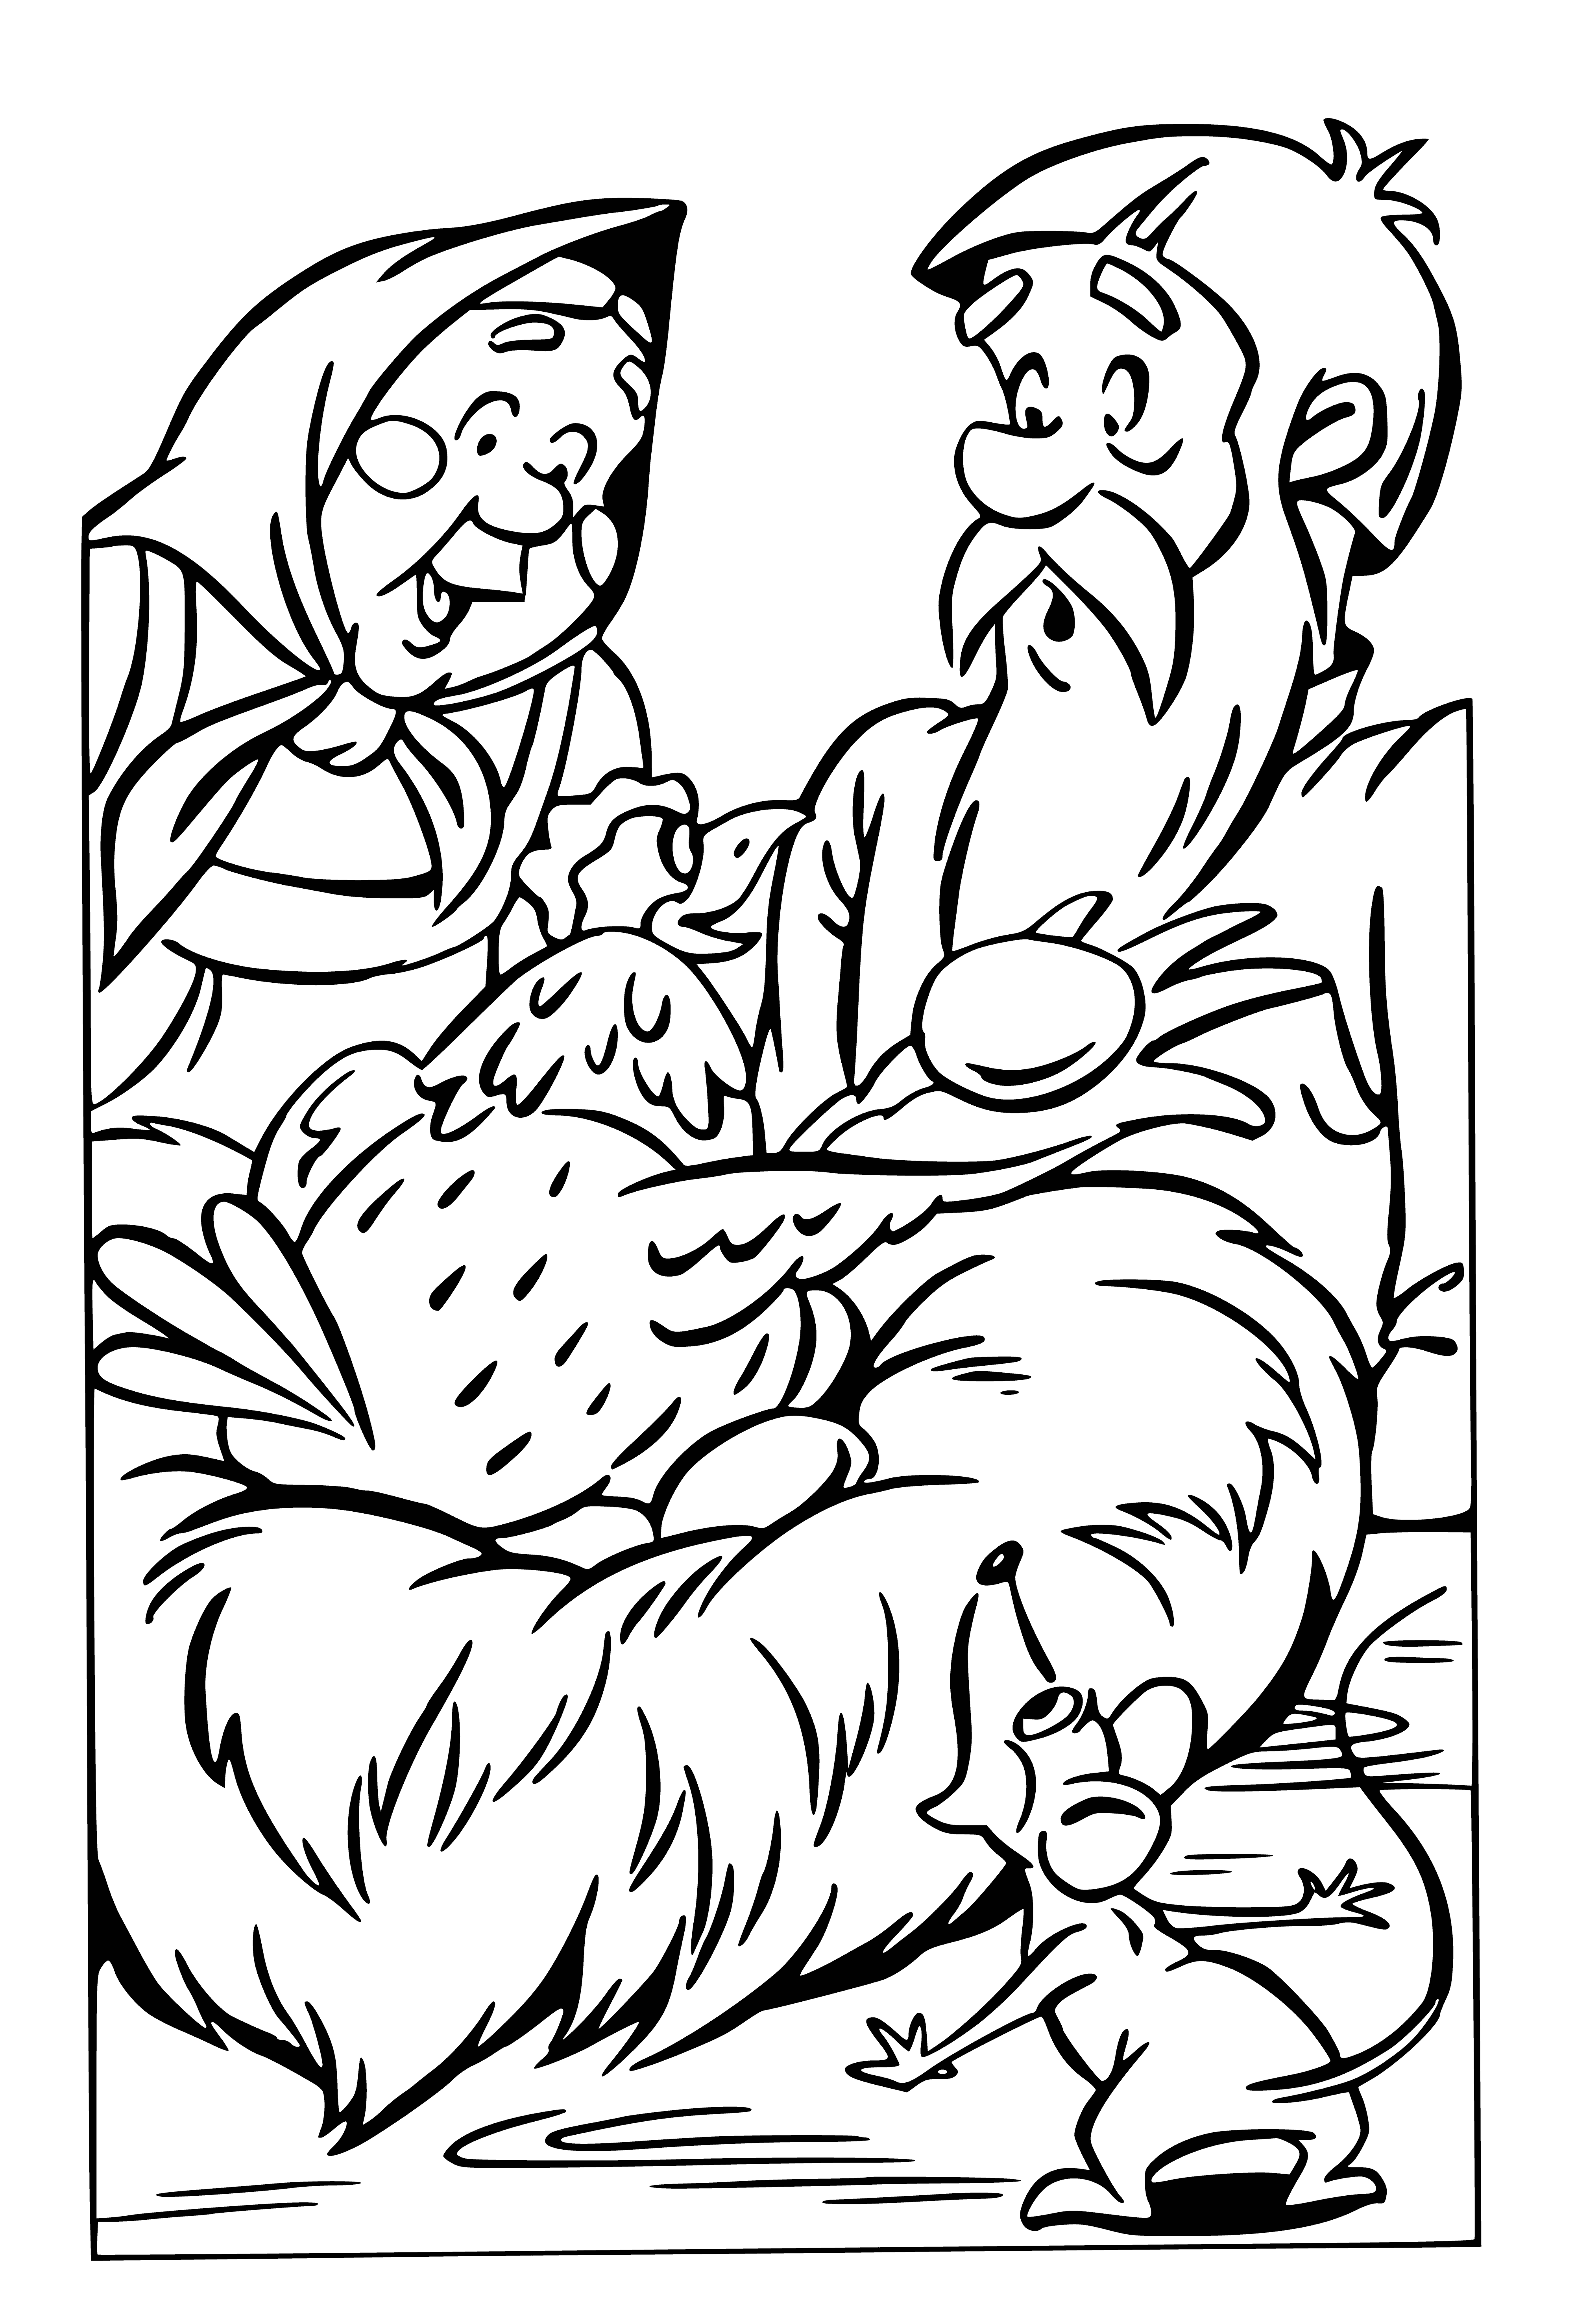 coloring page: A man in traditional Russian clothing holds a golden ball and is peekinged at by a woman behind a door.